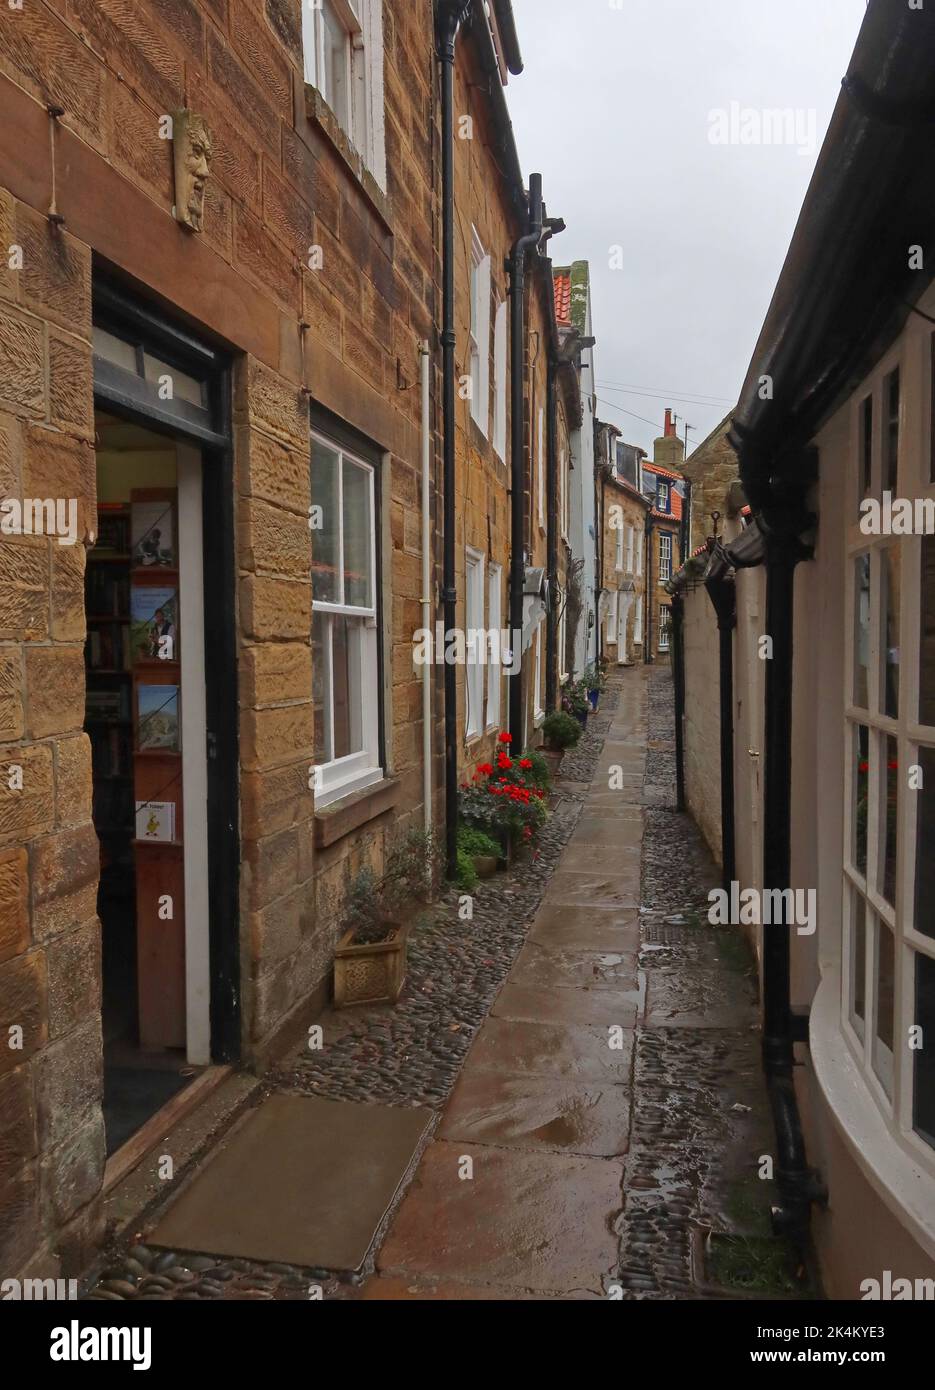 Church Lane, Robin Hoods Bay, Whitby, North Yorkshire, Angleterre, ROYAUME-UNI, YO22 4RD Banque D'Images